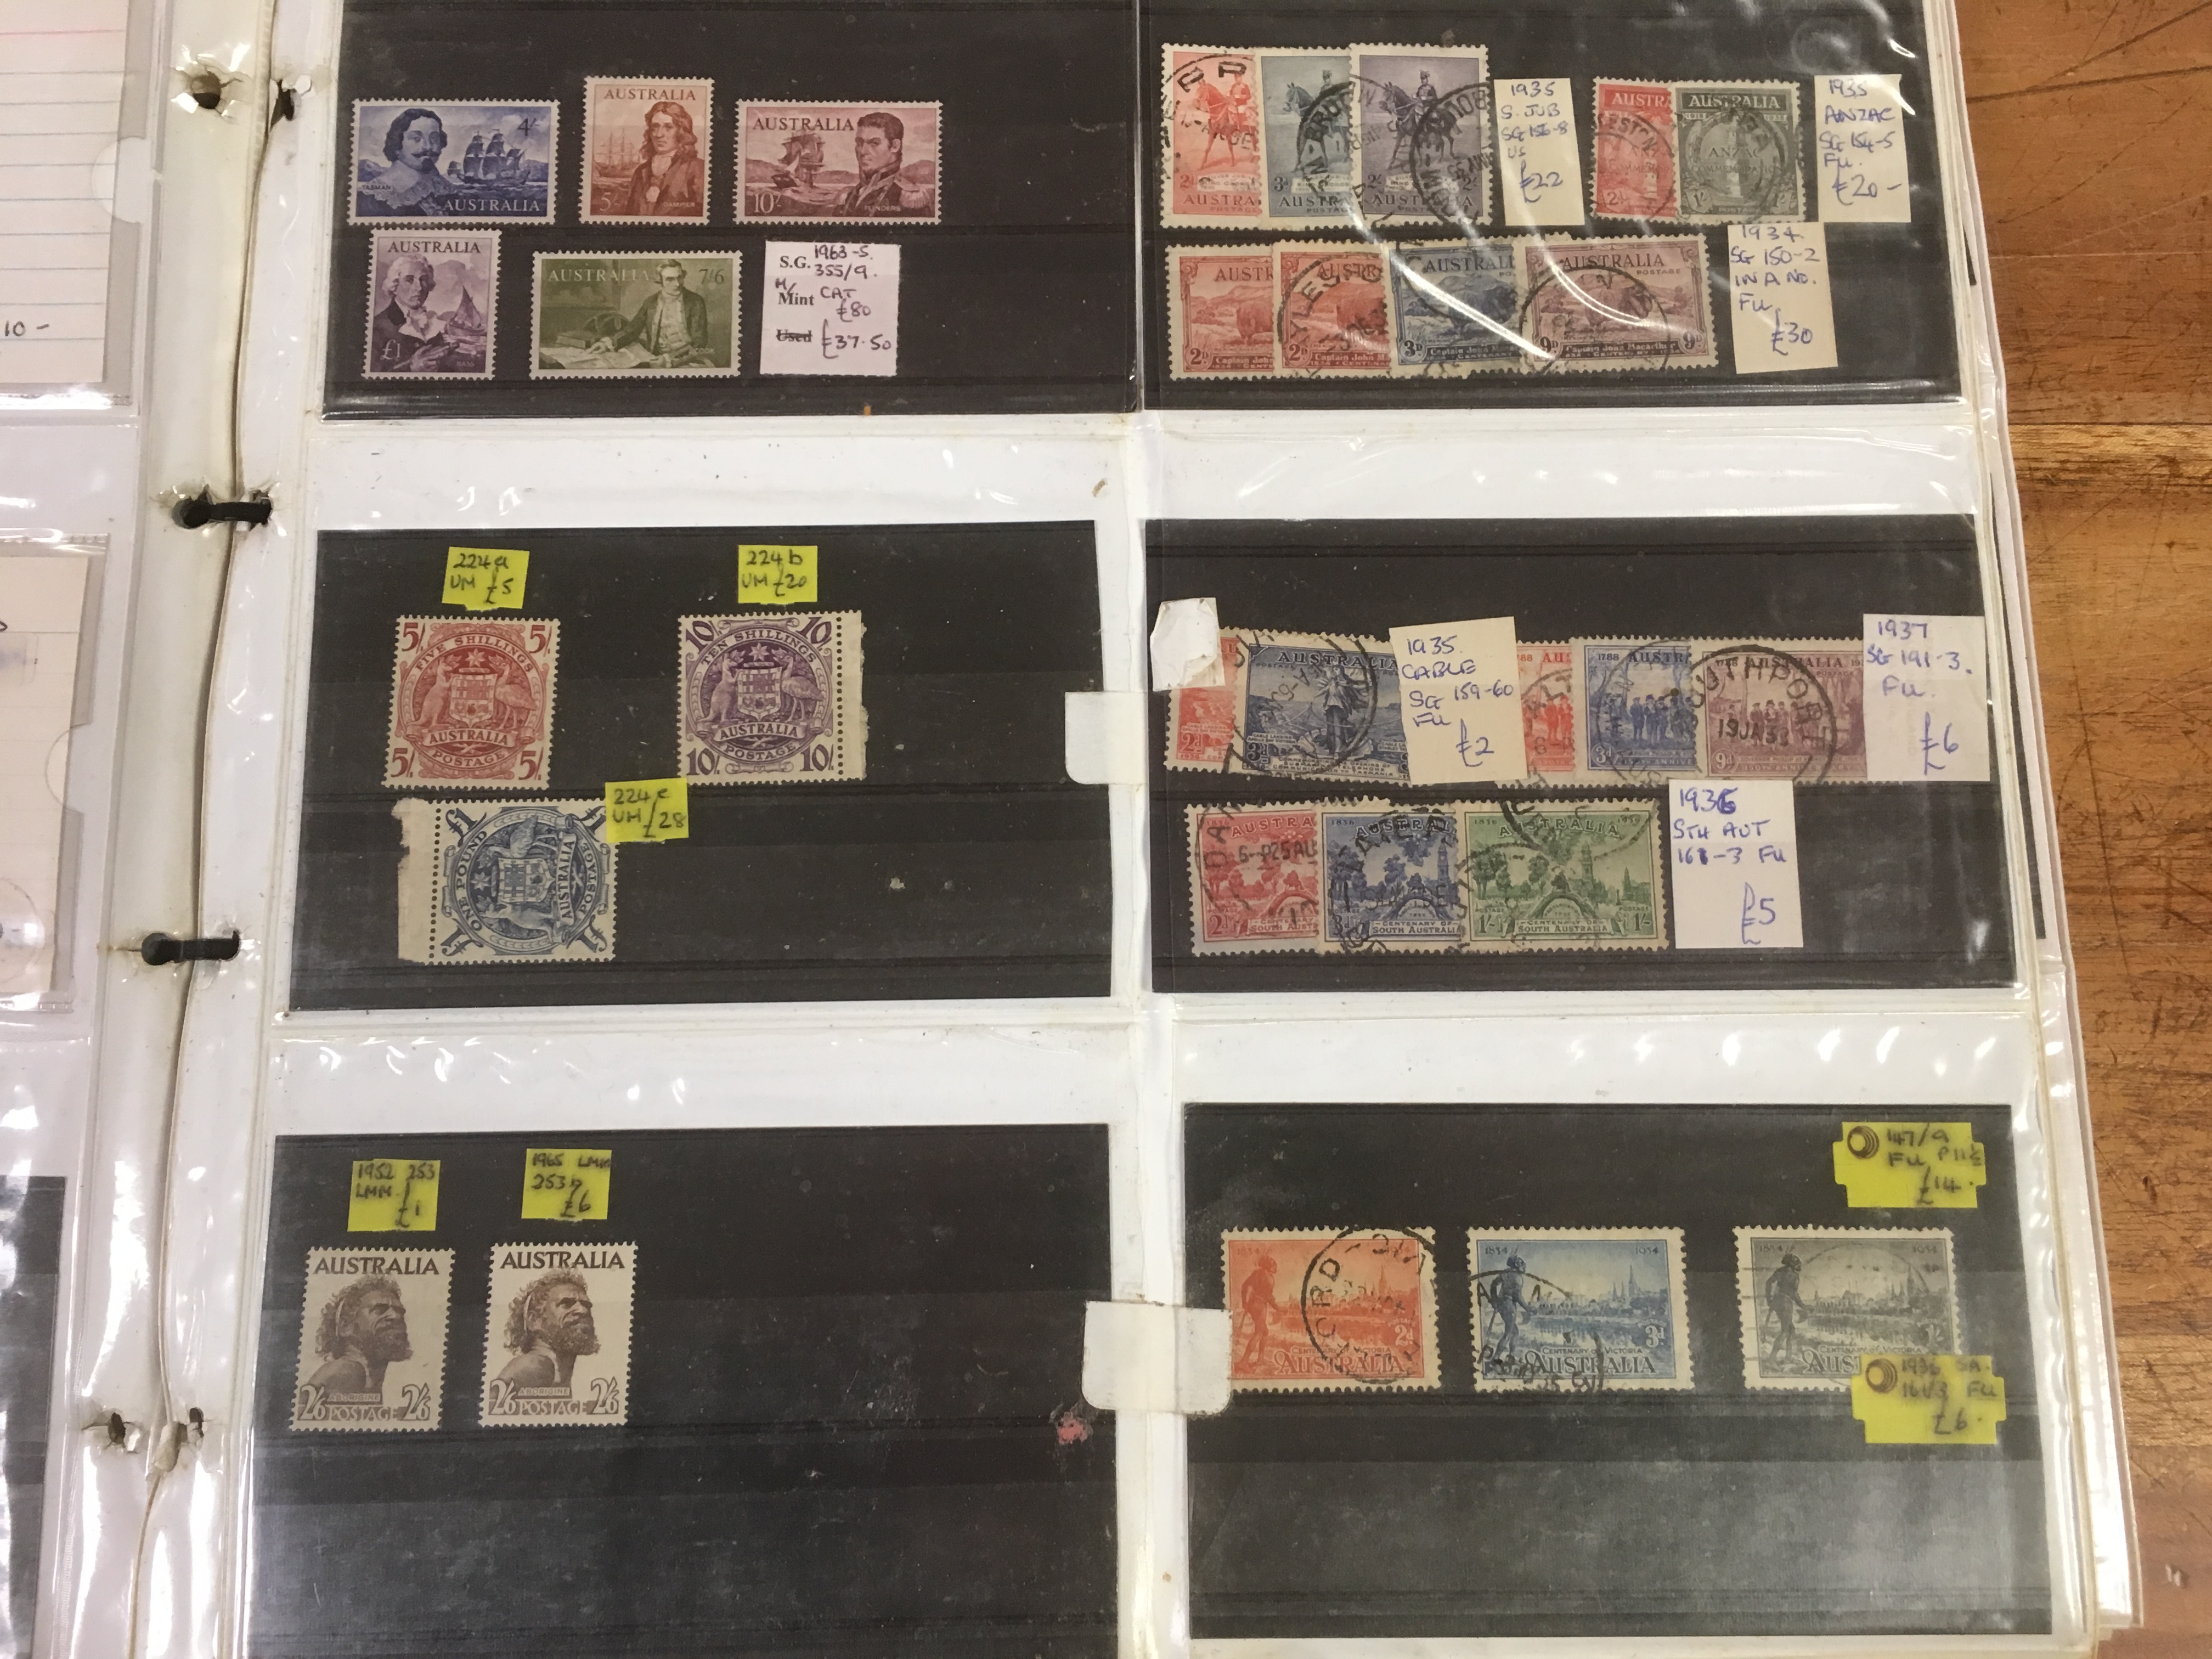 AUSTRALIA: EX DEALER'S STOCK OF SETS AND SINGLES ON PAGES, - Image 4 of 10